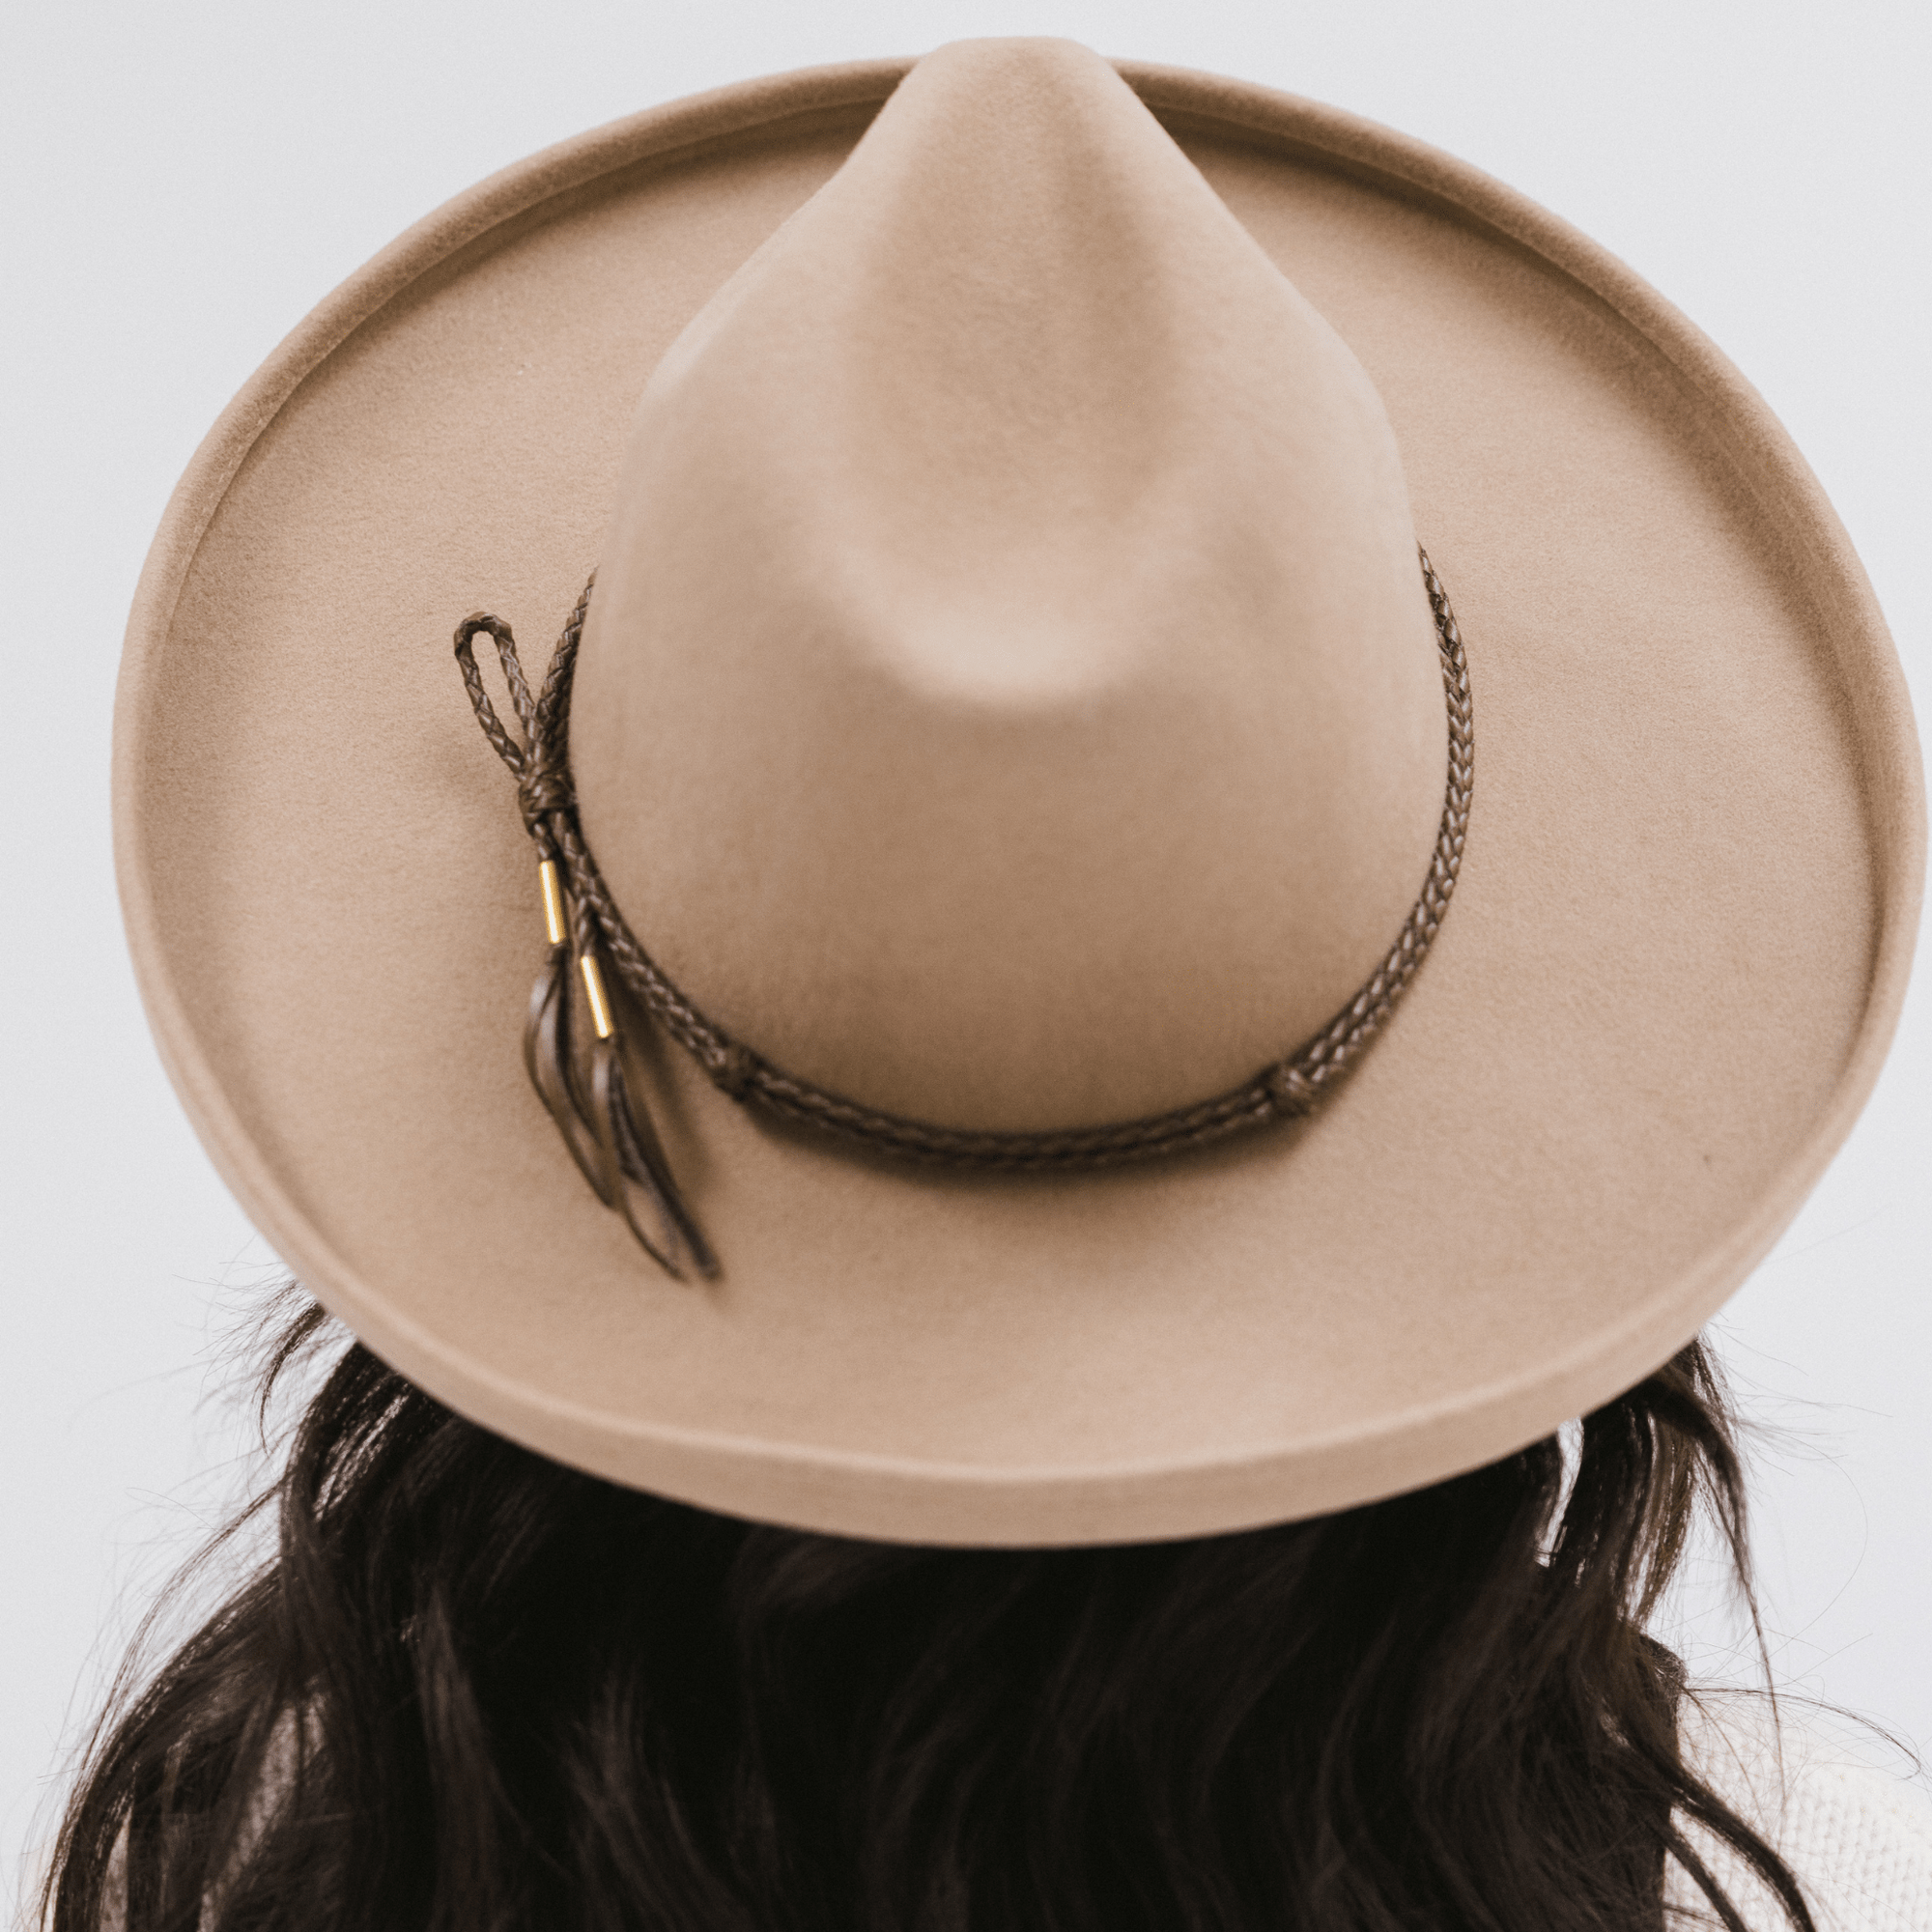 Gigi Pip hat bands + trims for women's hats - Lasso Band - 100% genuine leather + gold plated metal hat band with gigi pip engraved on gold metal details, one size fits all [beige]